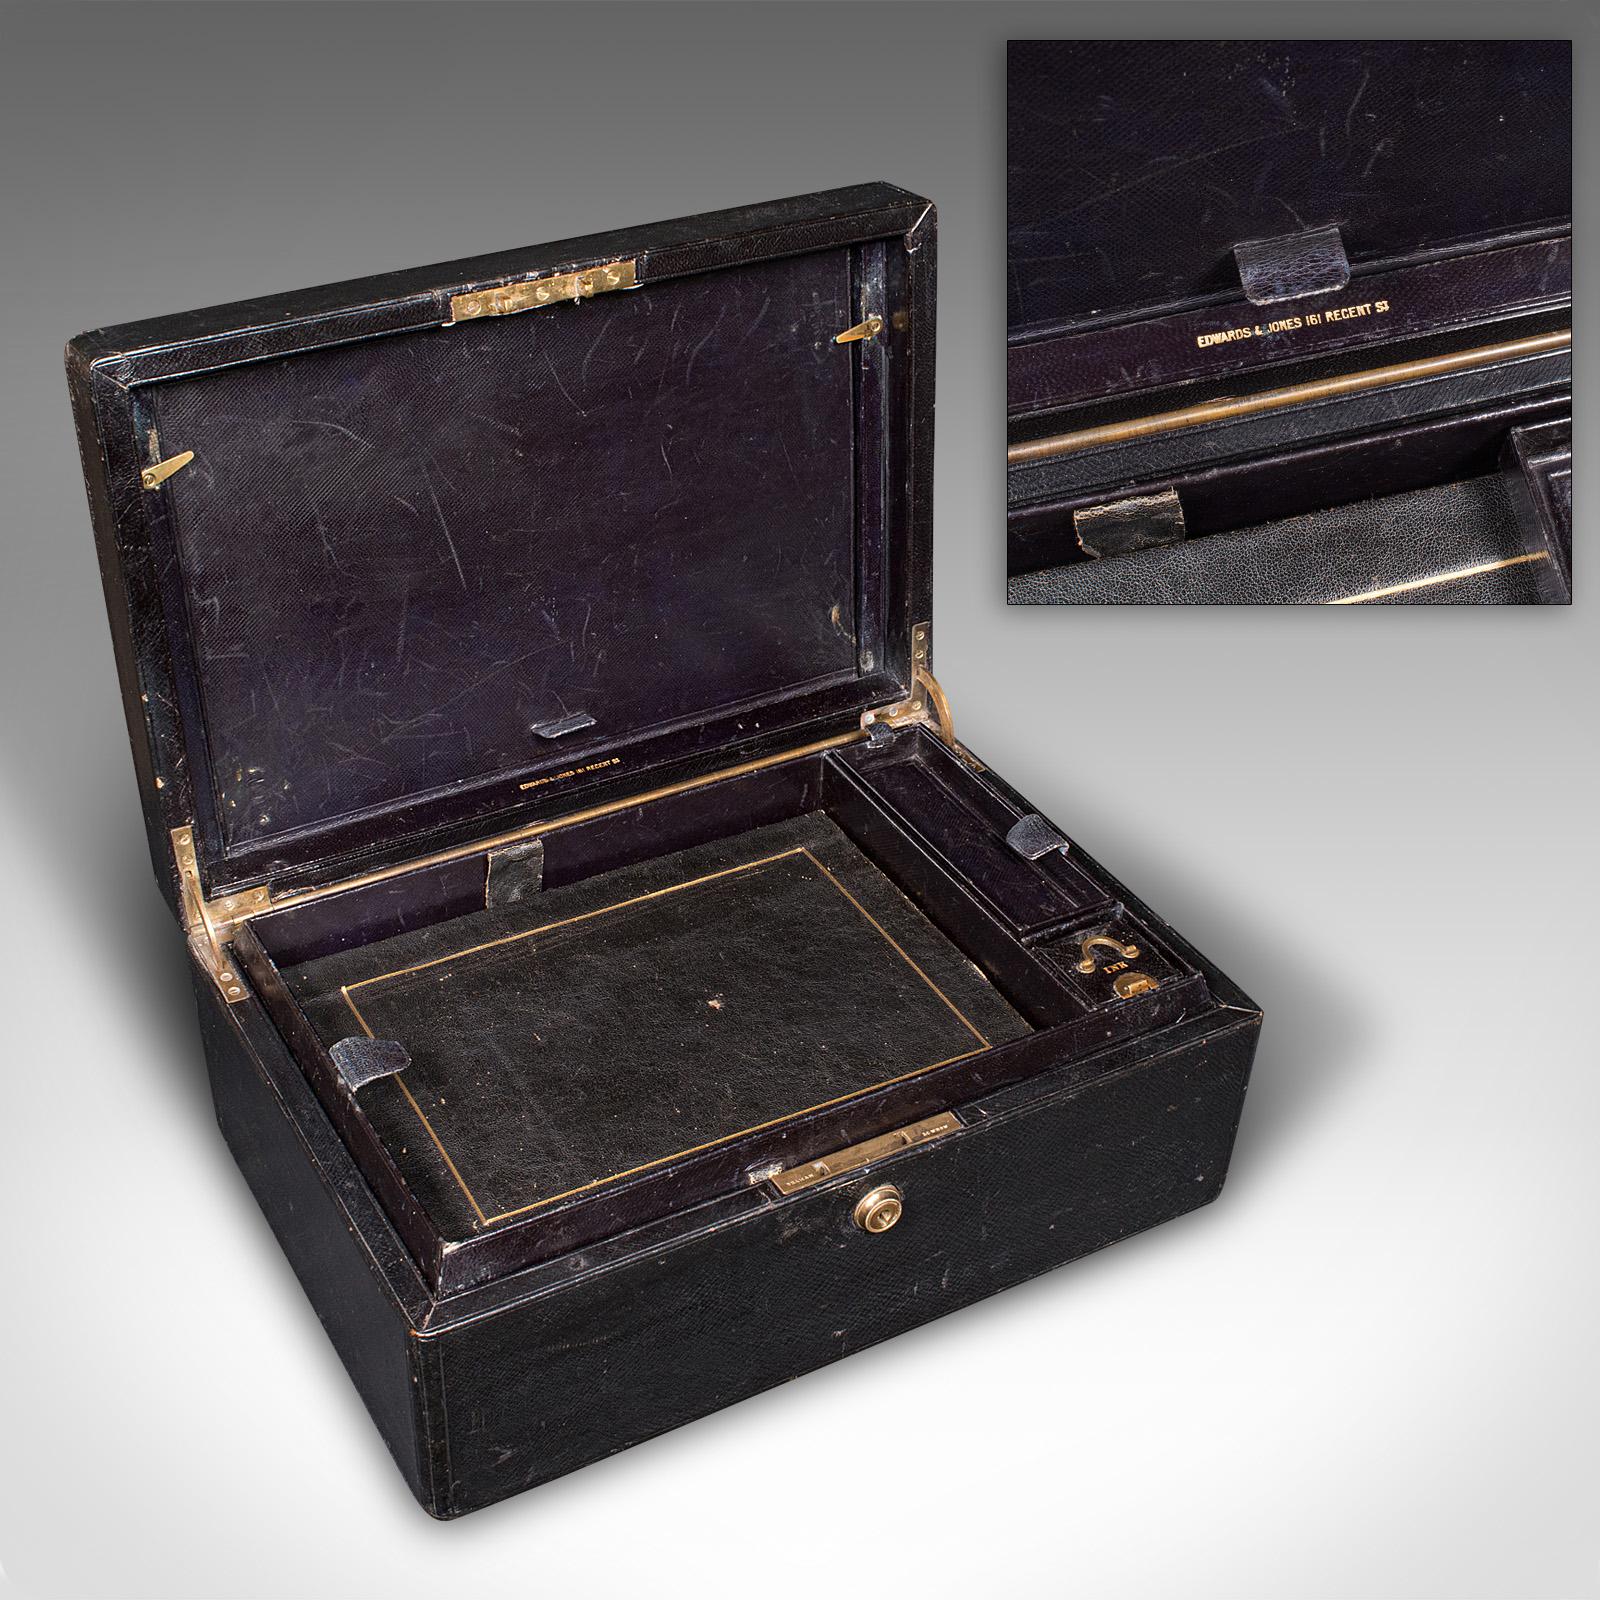 This is an antique correspondence box. An English, leather bound writing case, dating to he late Victorian period, circa 1890.

Graced with a suite of features and appealing dark finish
Displays a desirable aged patina and in good original